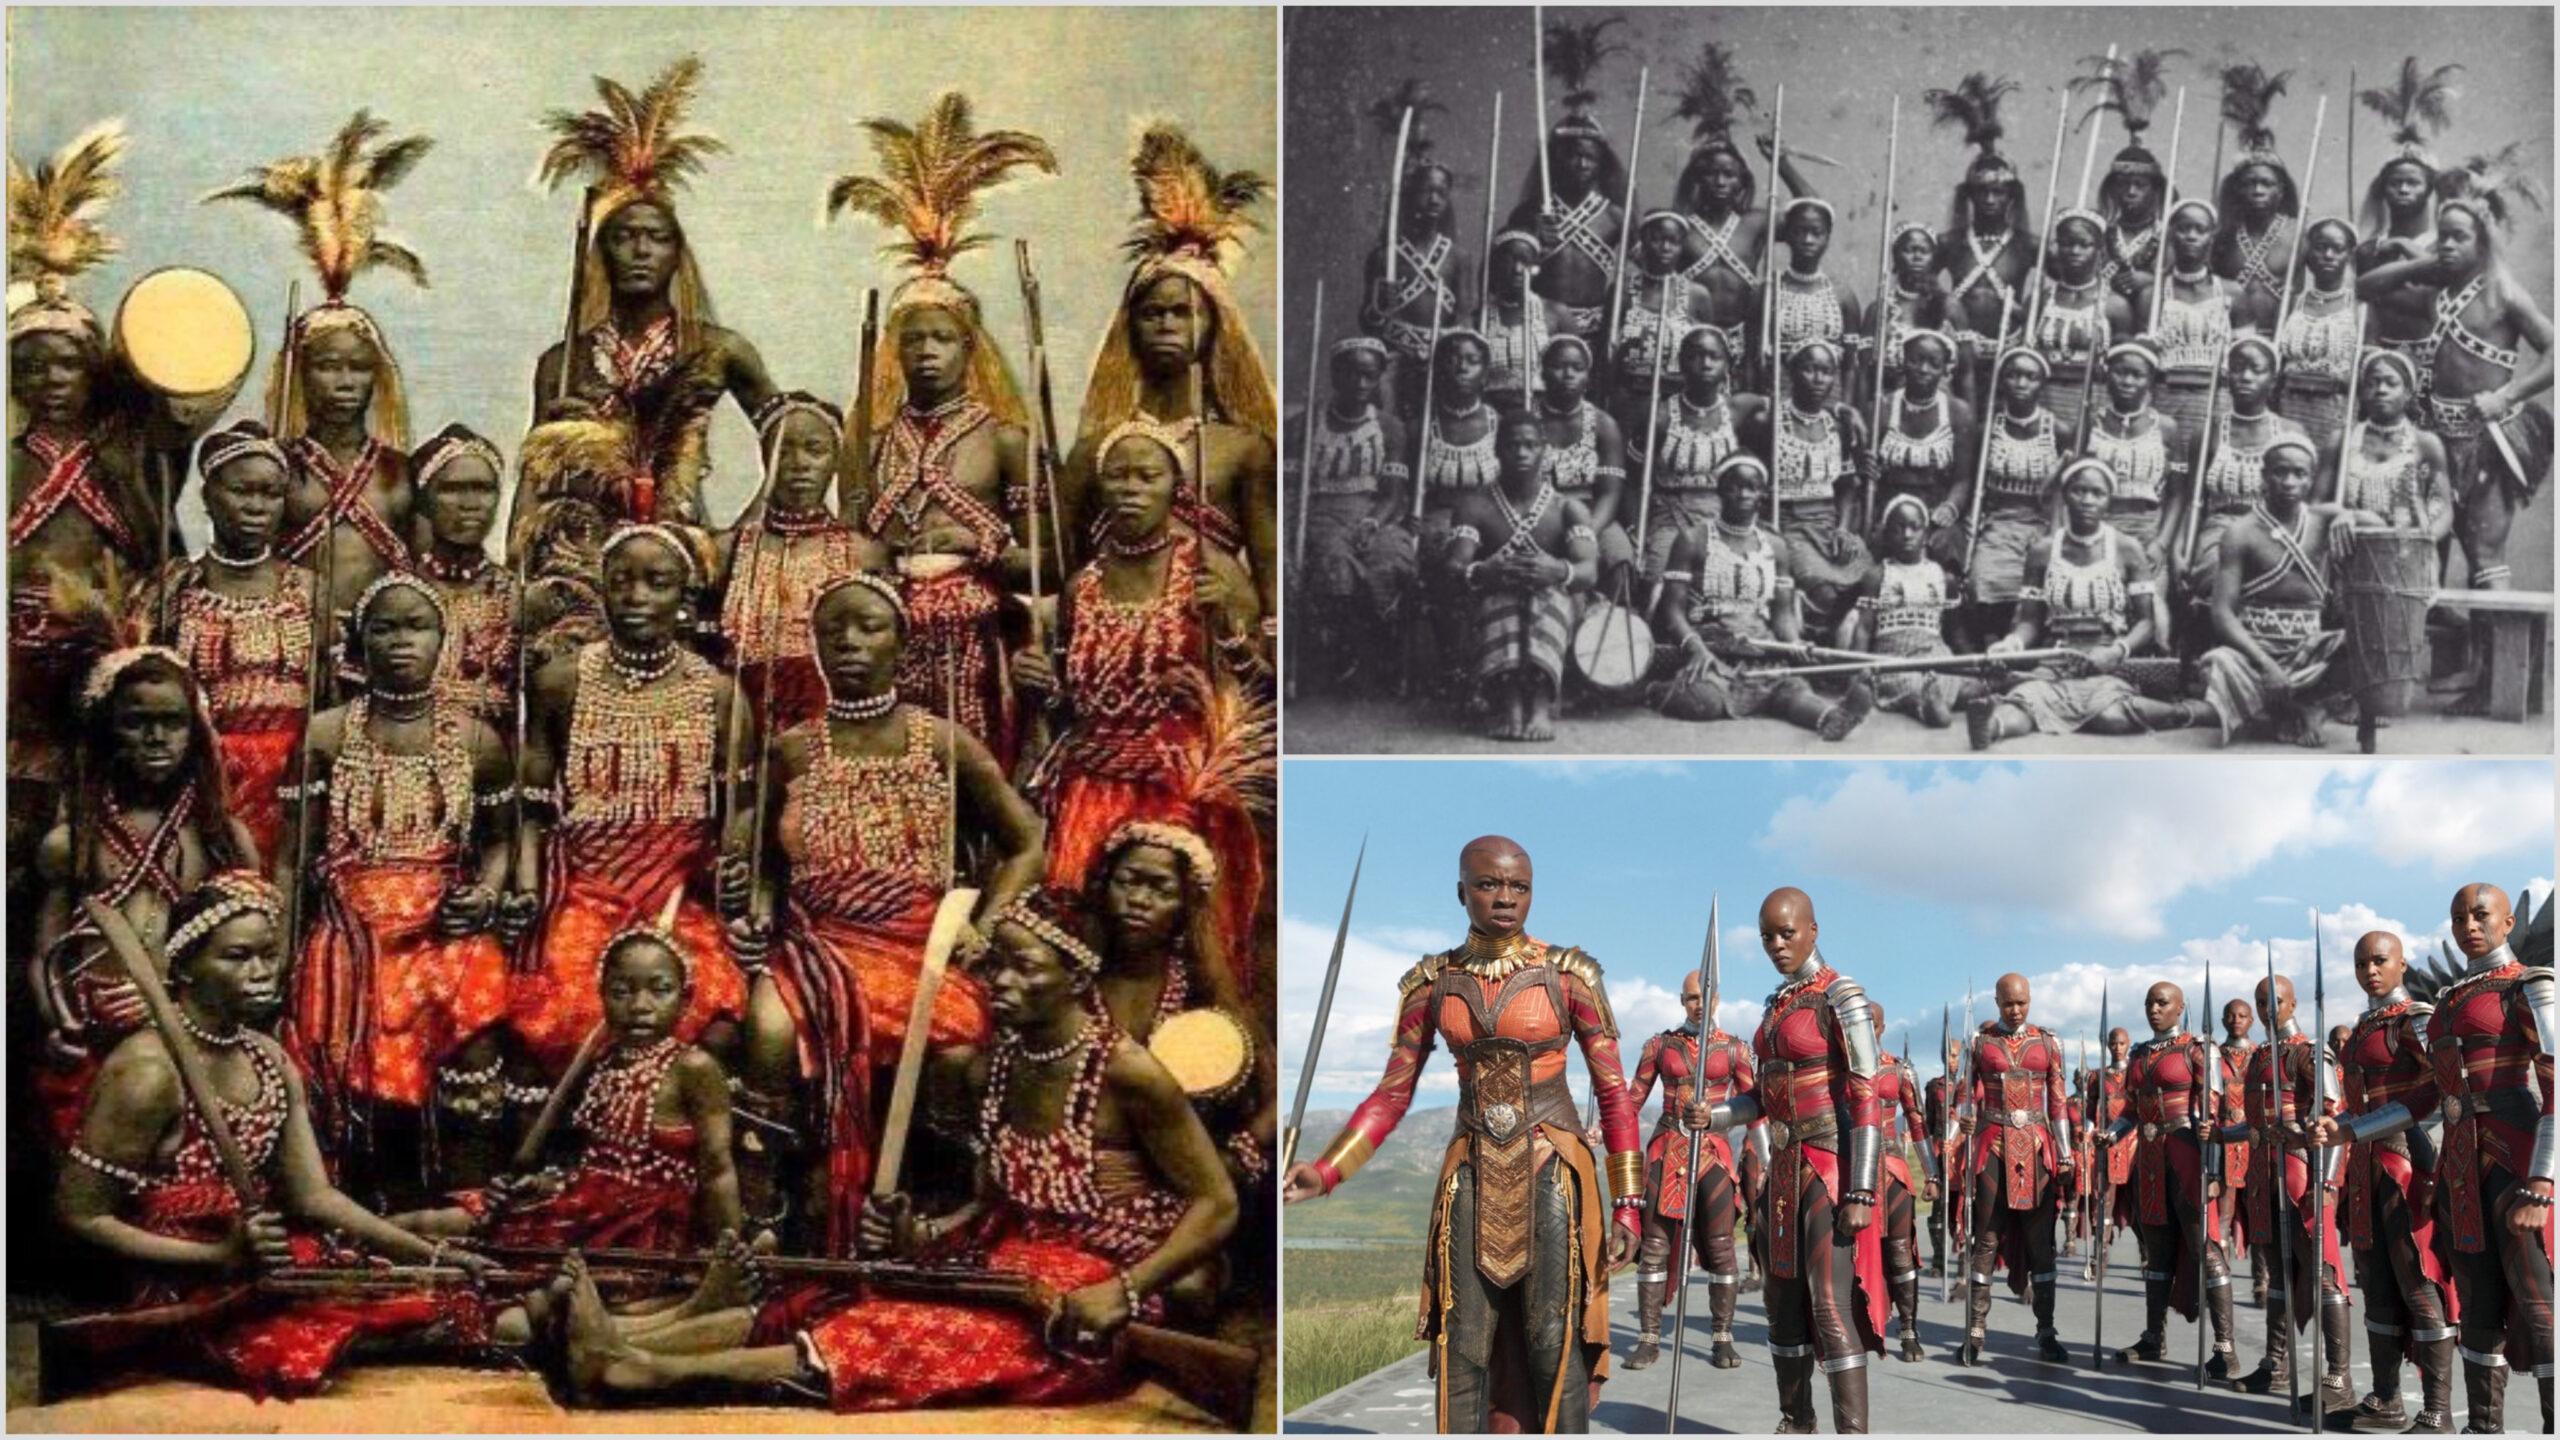 African women warriors from Dahomey Kingdom (17th century) that inspired Black Panther